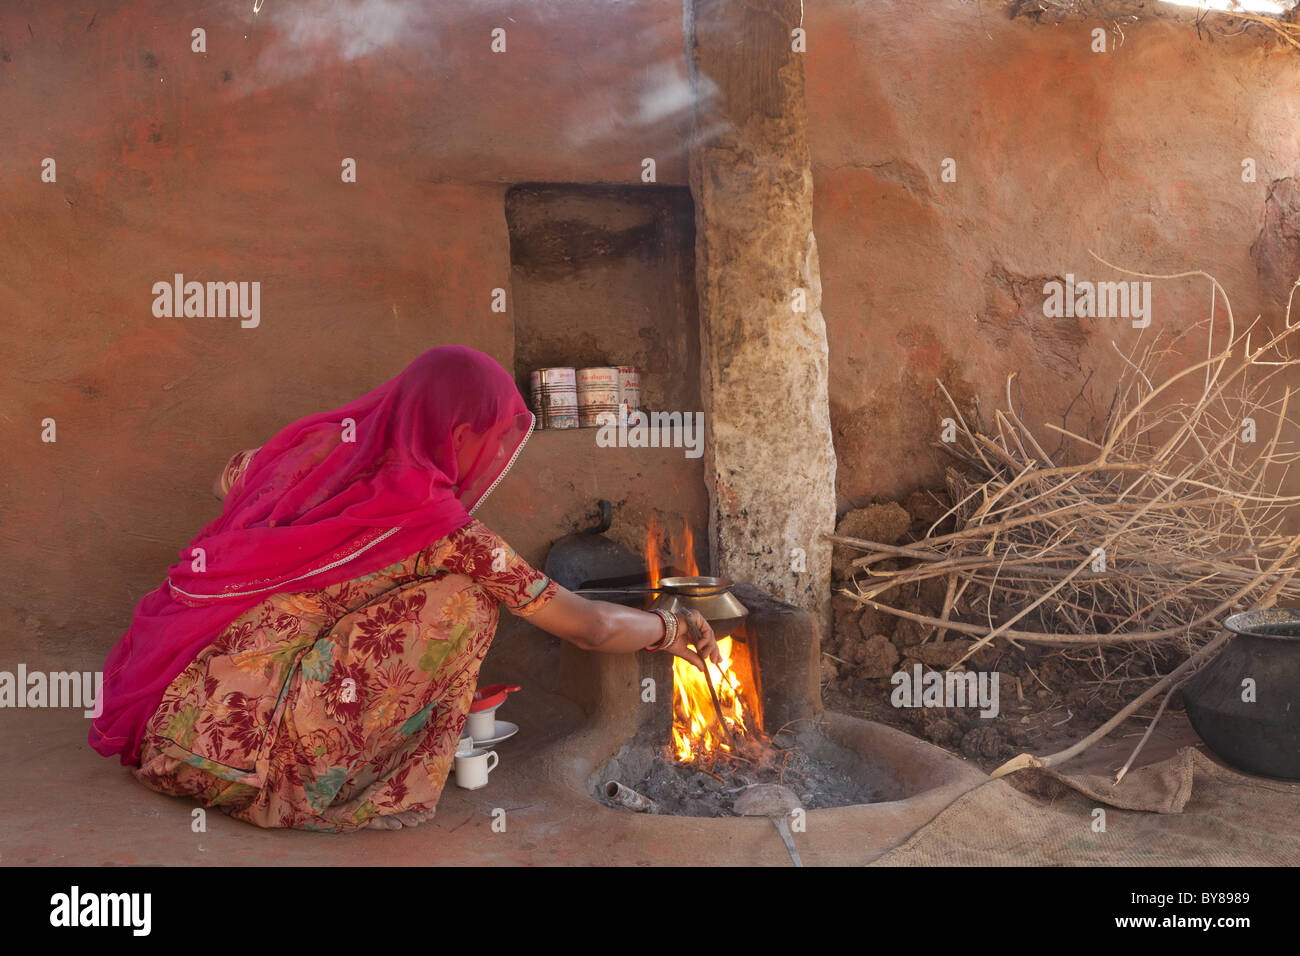 India, Rajasthan, Jodhpur, woman in traditional dress boiling water on open fire Stock Photo